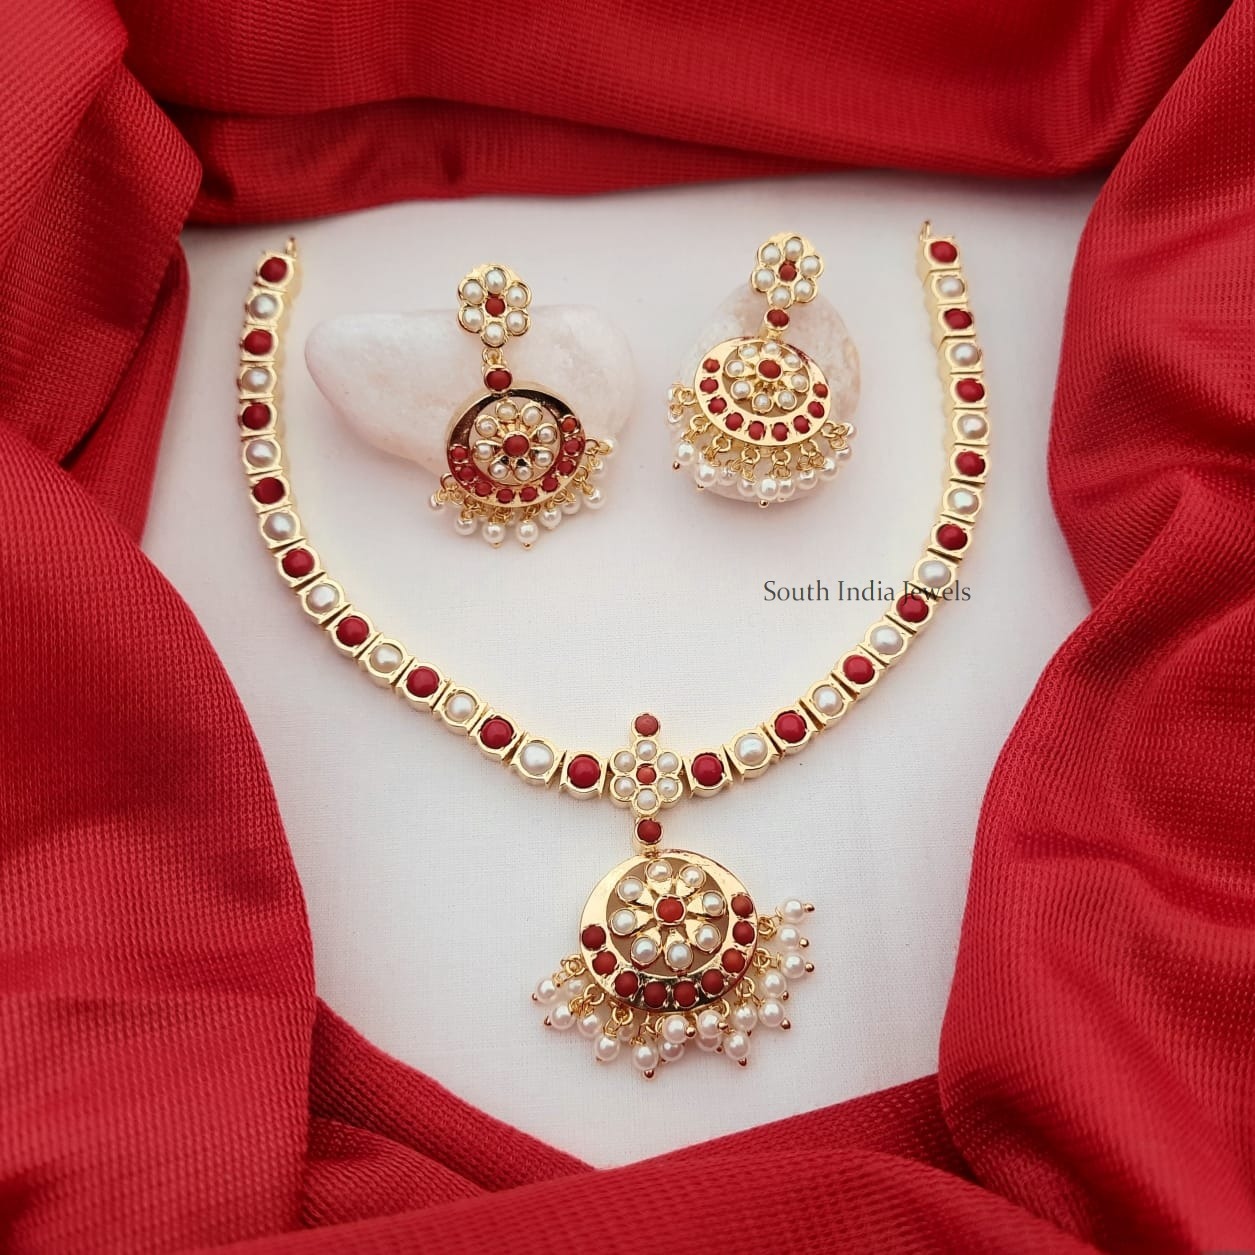 22 Carat Gold Coral Necklace - Indian Jewellery Designs